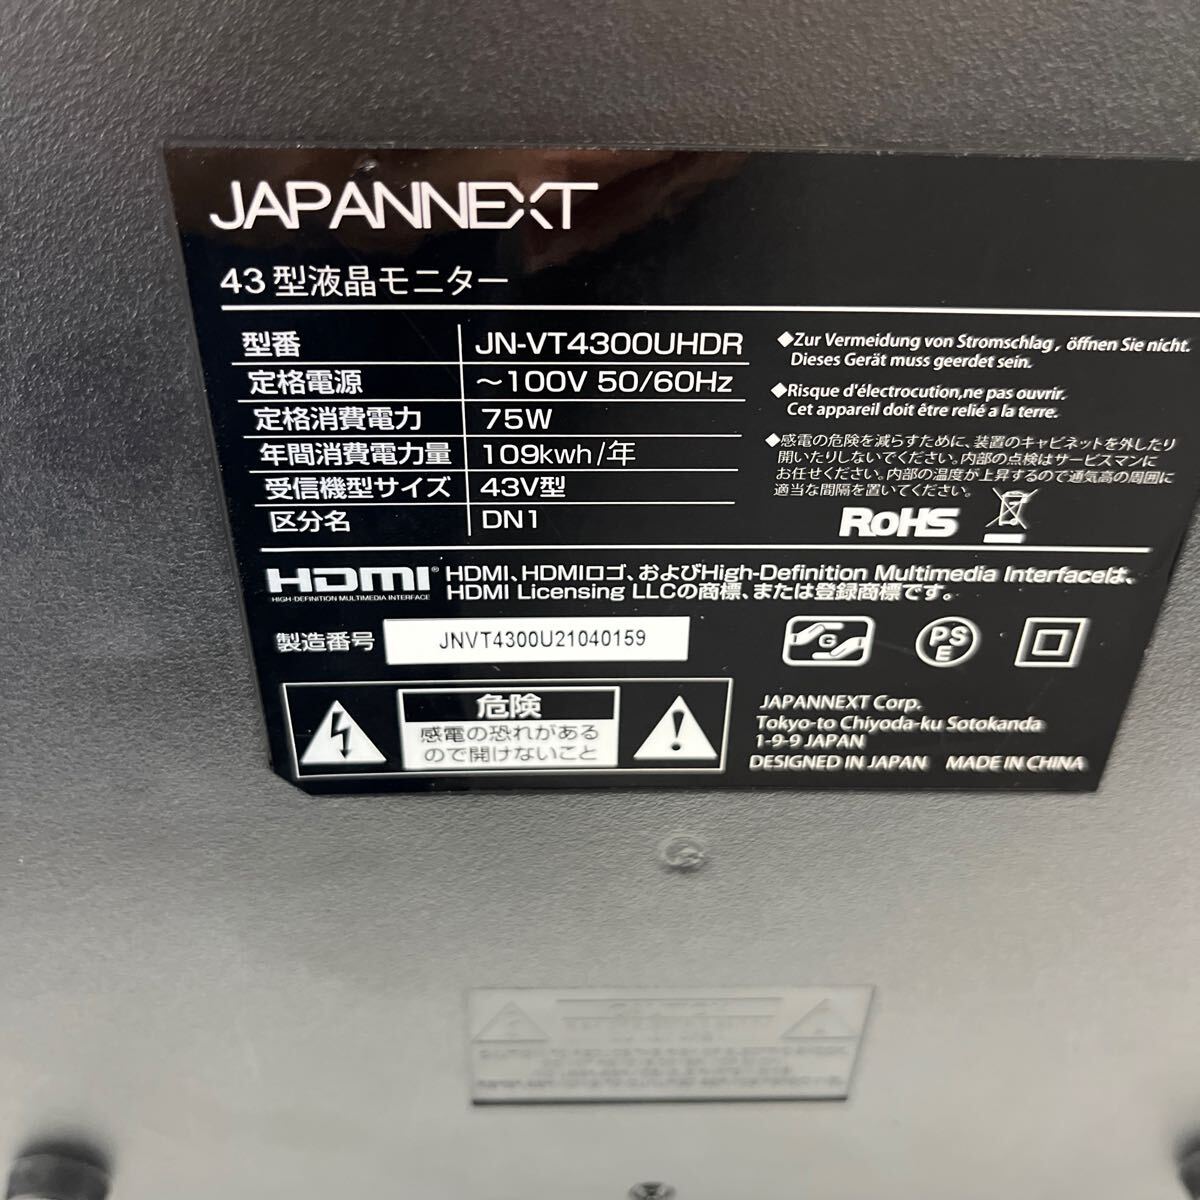  receipt limitation (pick up) JAPANNEXT 43 type monitor as .... bad therefore junk treatment please.